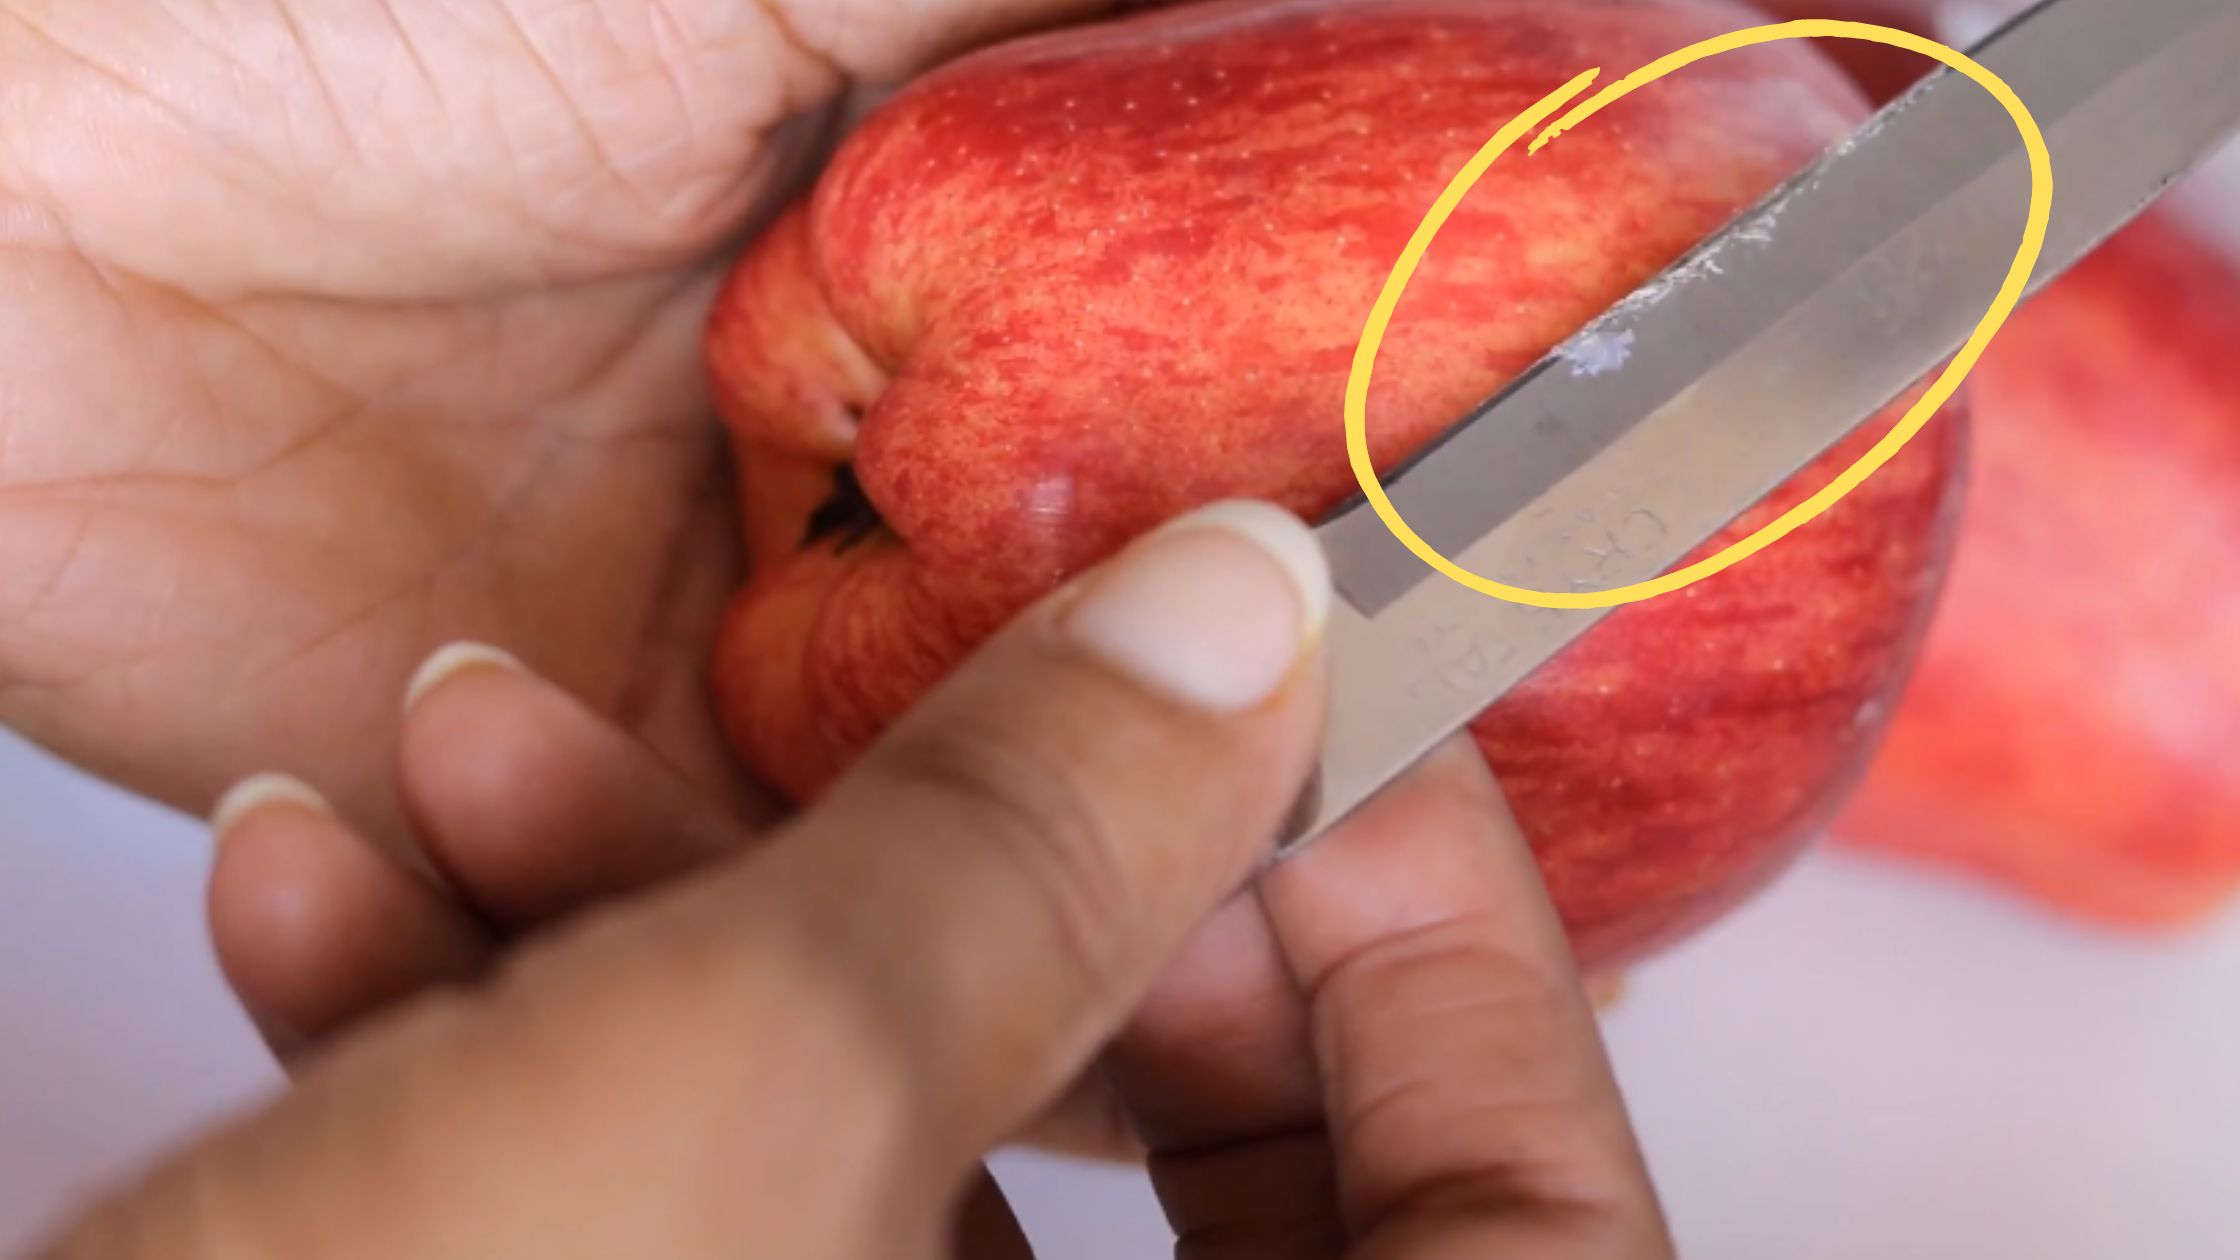 how to check and remove wax coting on apple